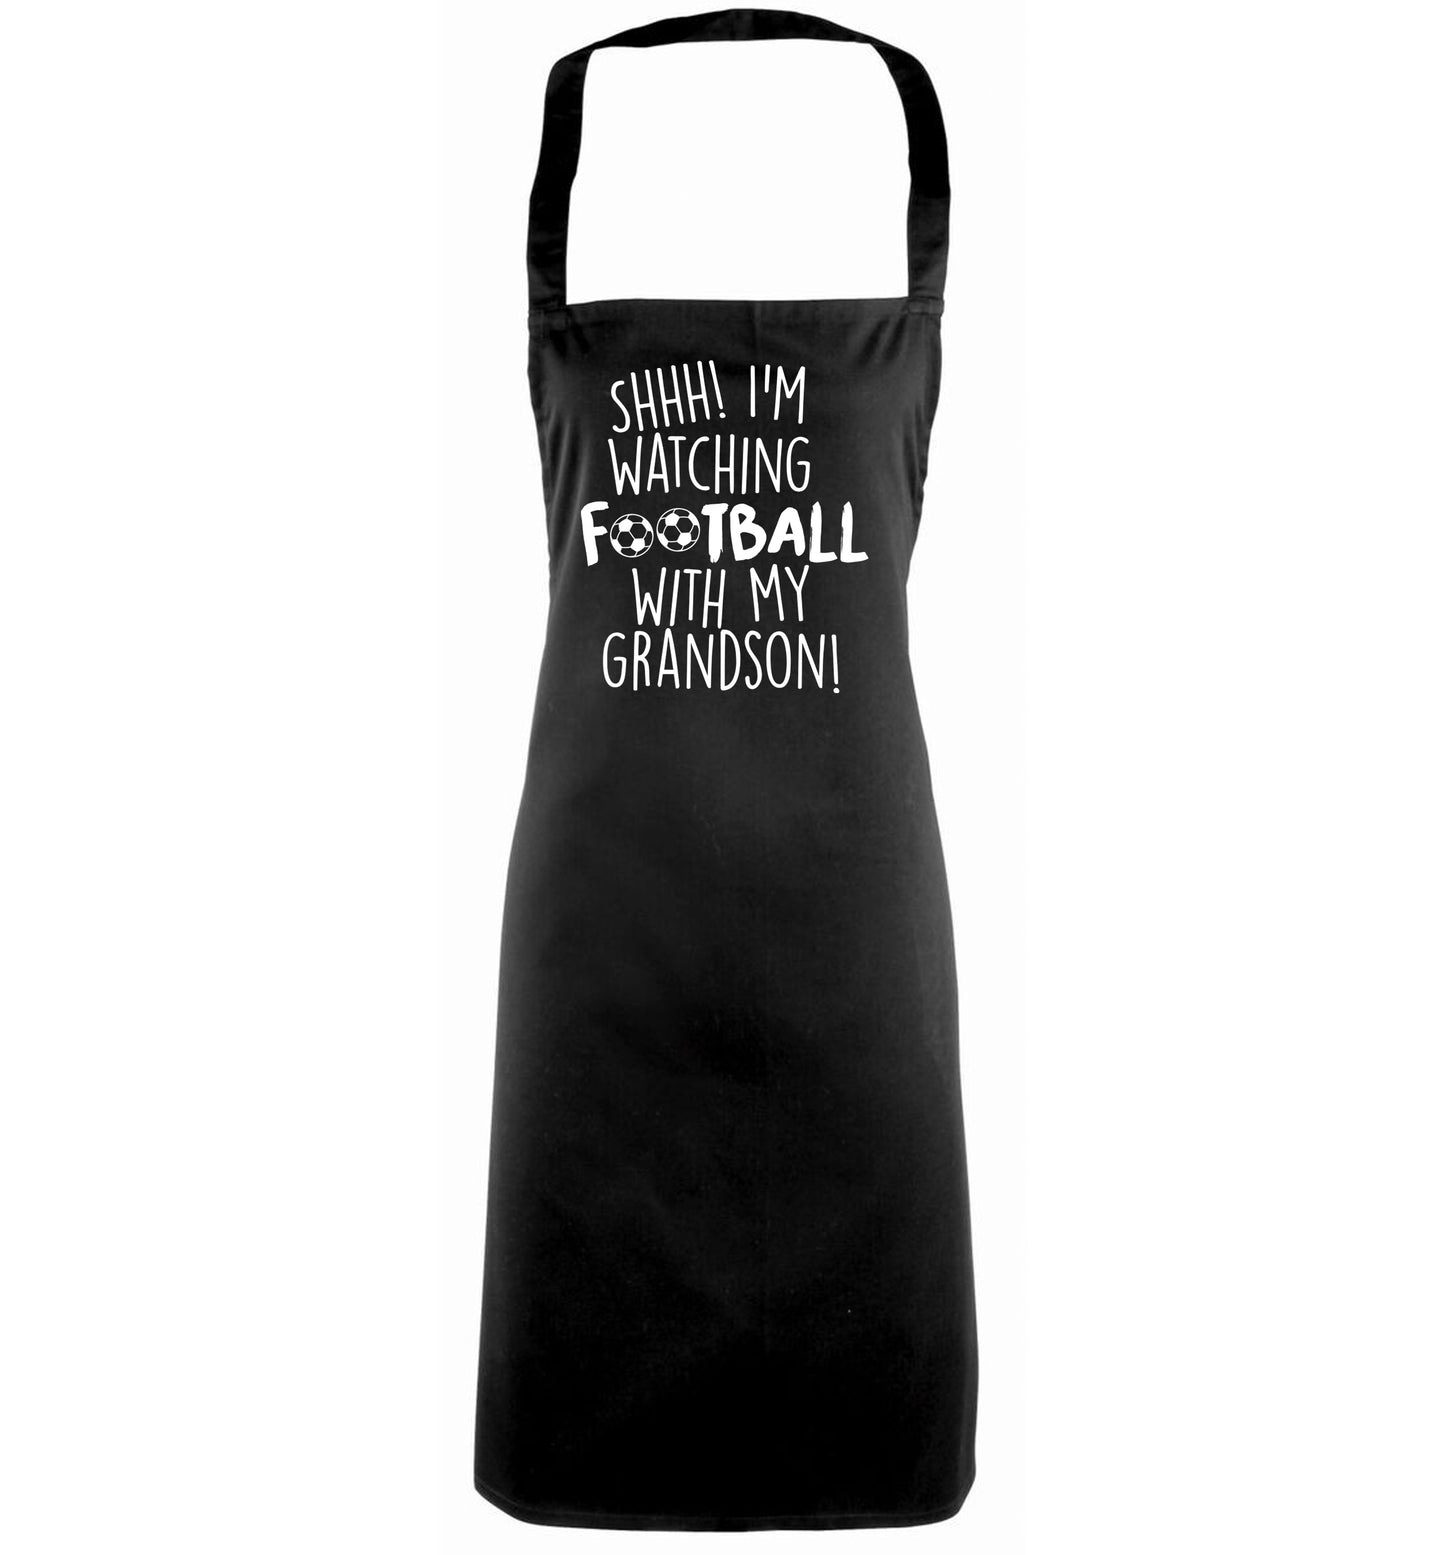 Shhh I'm watching football with my grandson black apron